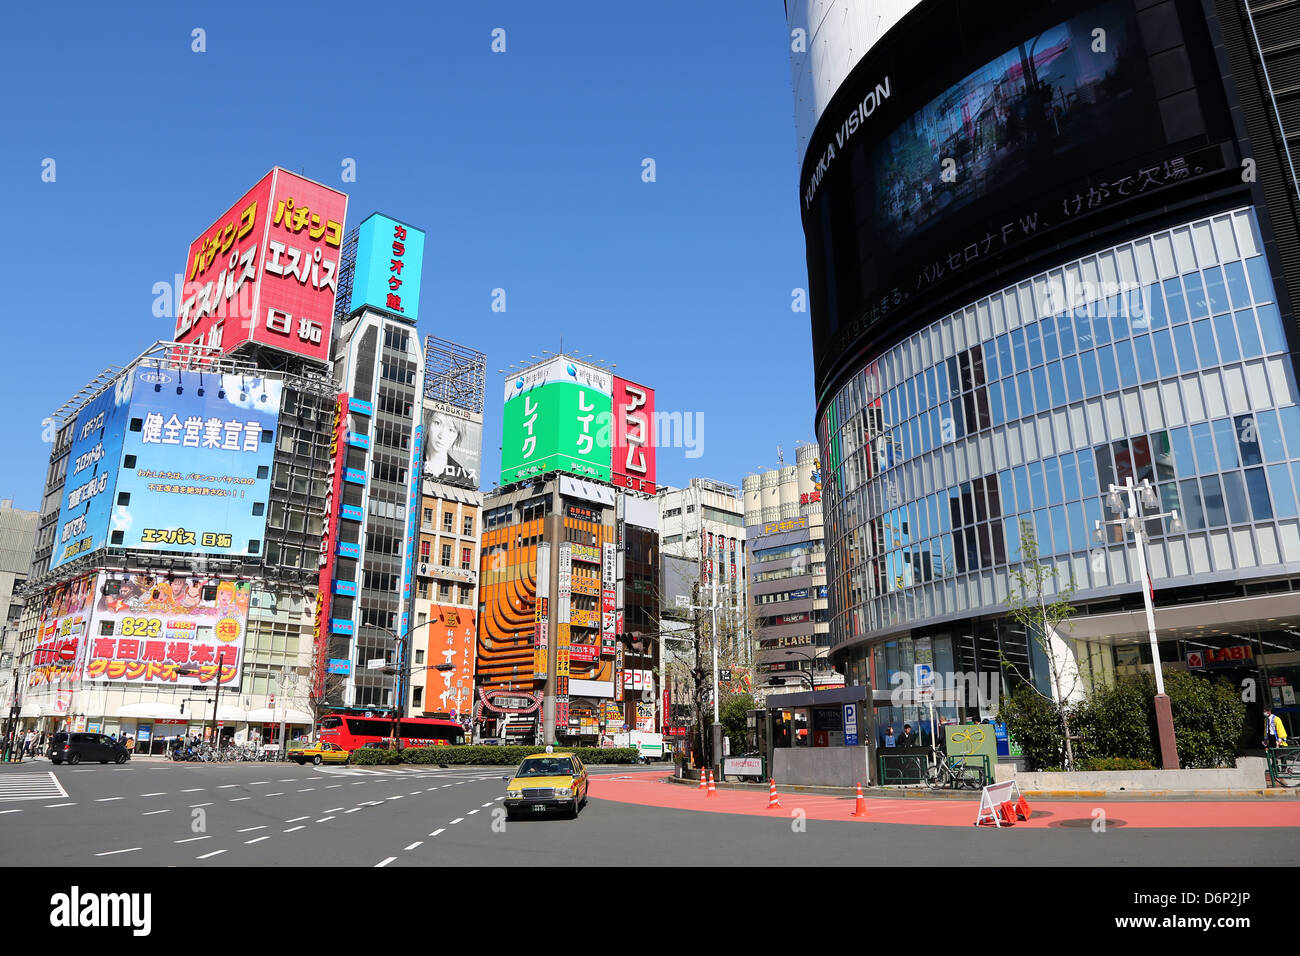 Street scene with signs and advertising in Shinjuku, Tokyo, Japan Stock Photo